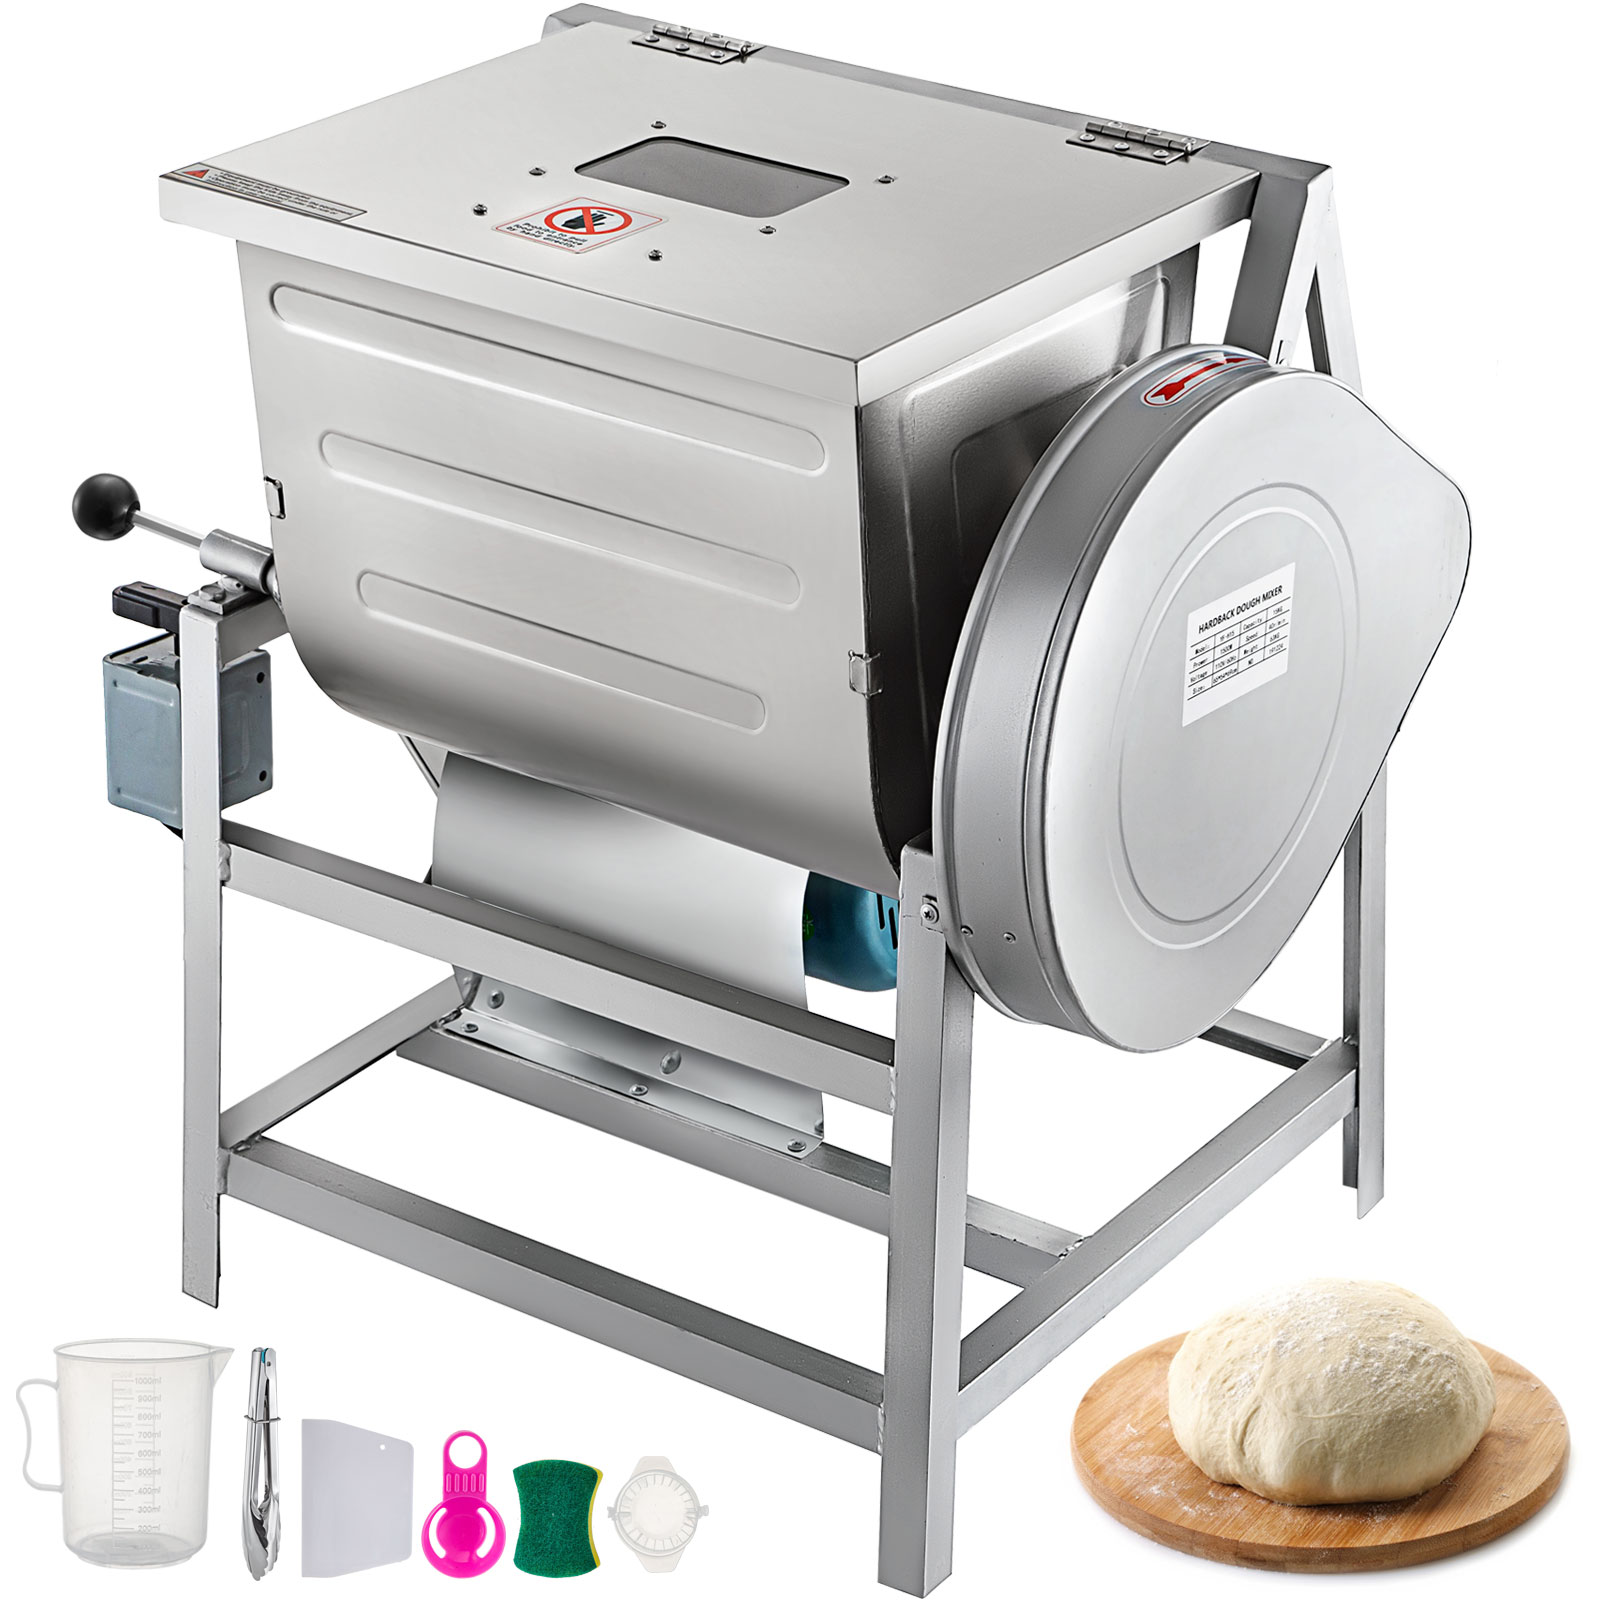 VEVOR 110V Commercial Dough Mixer 25kg, Kneading Capacity 50 QT, Flour Mixer 2200W, with Visible Lid, Heavy-Duty Pizza Dough Mixer 304 Stainless Steel от Vevor Many GEOs